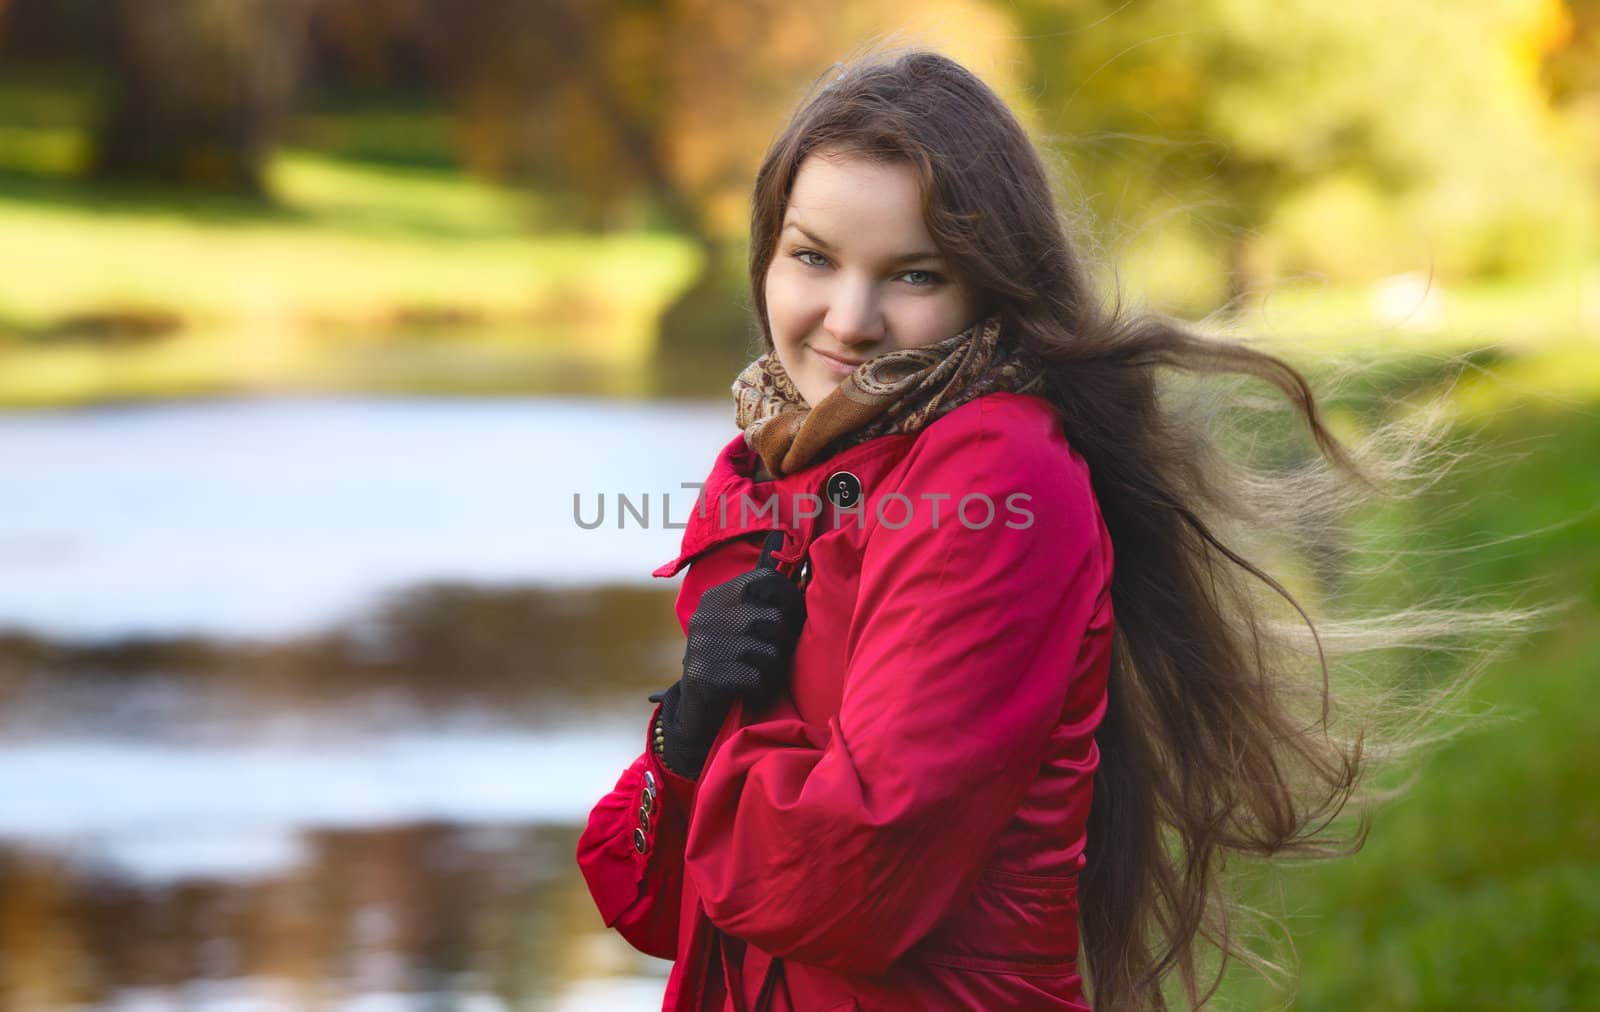 beautiful girl on river shore at autumn